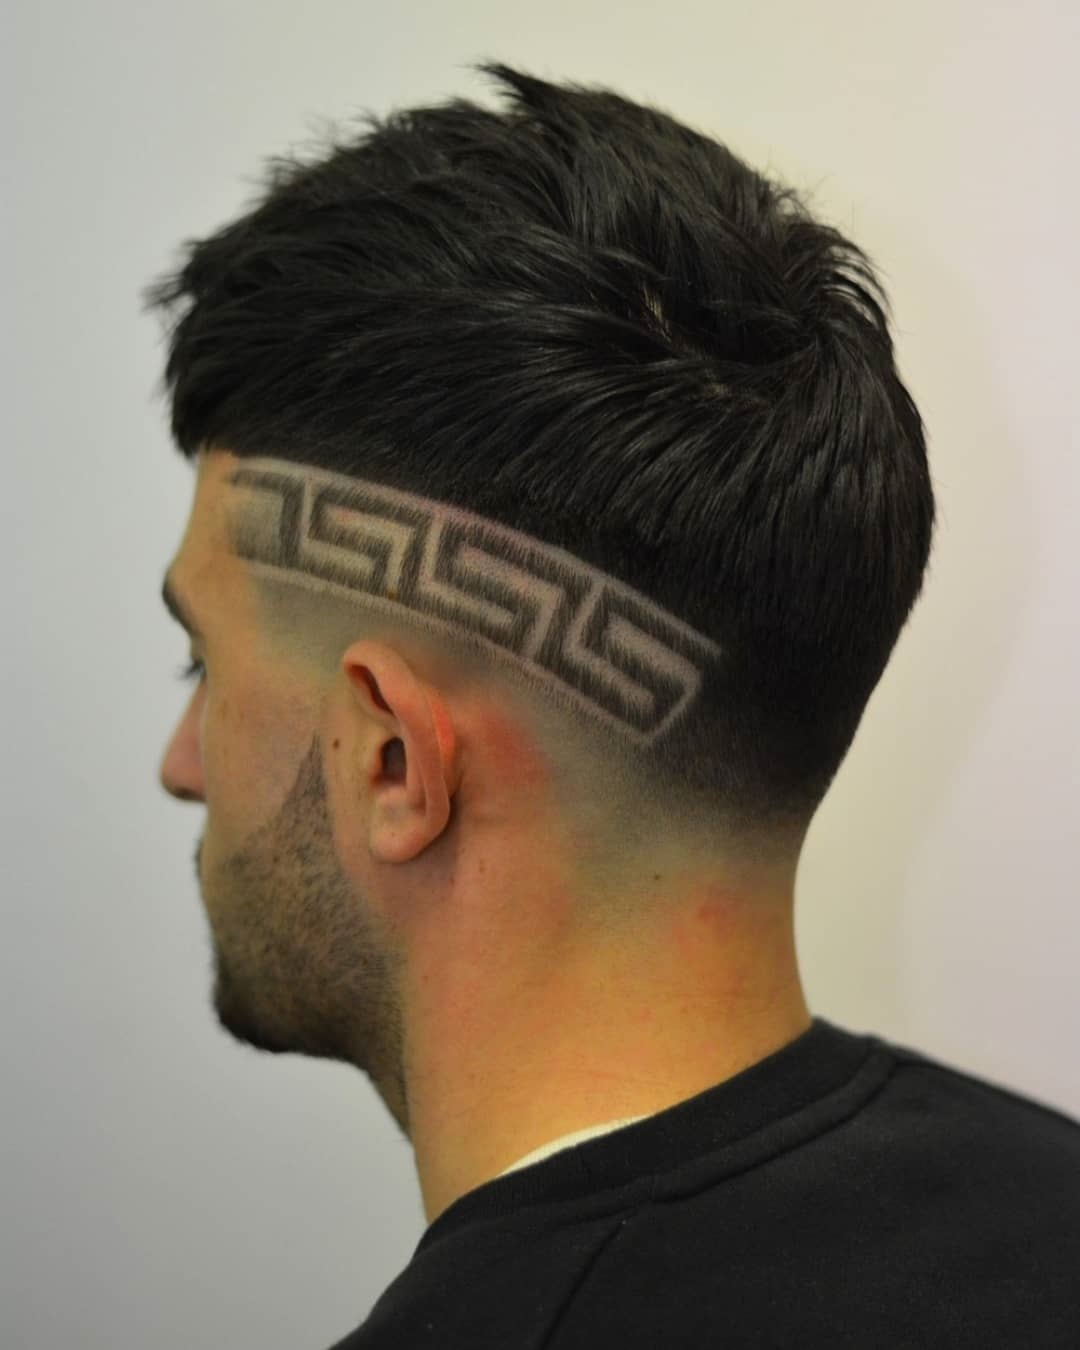 Skin Fade and Greek Patterns